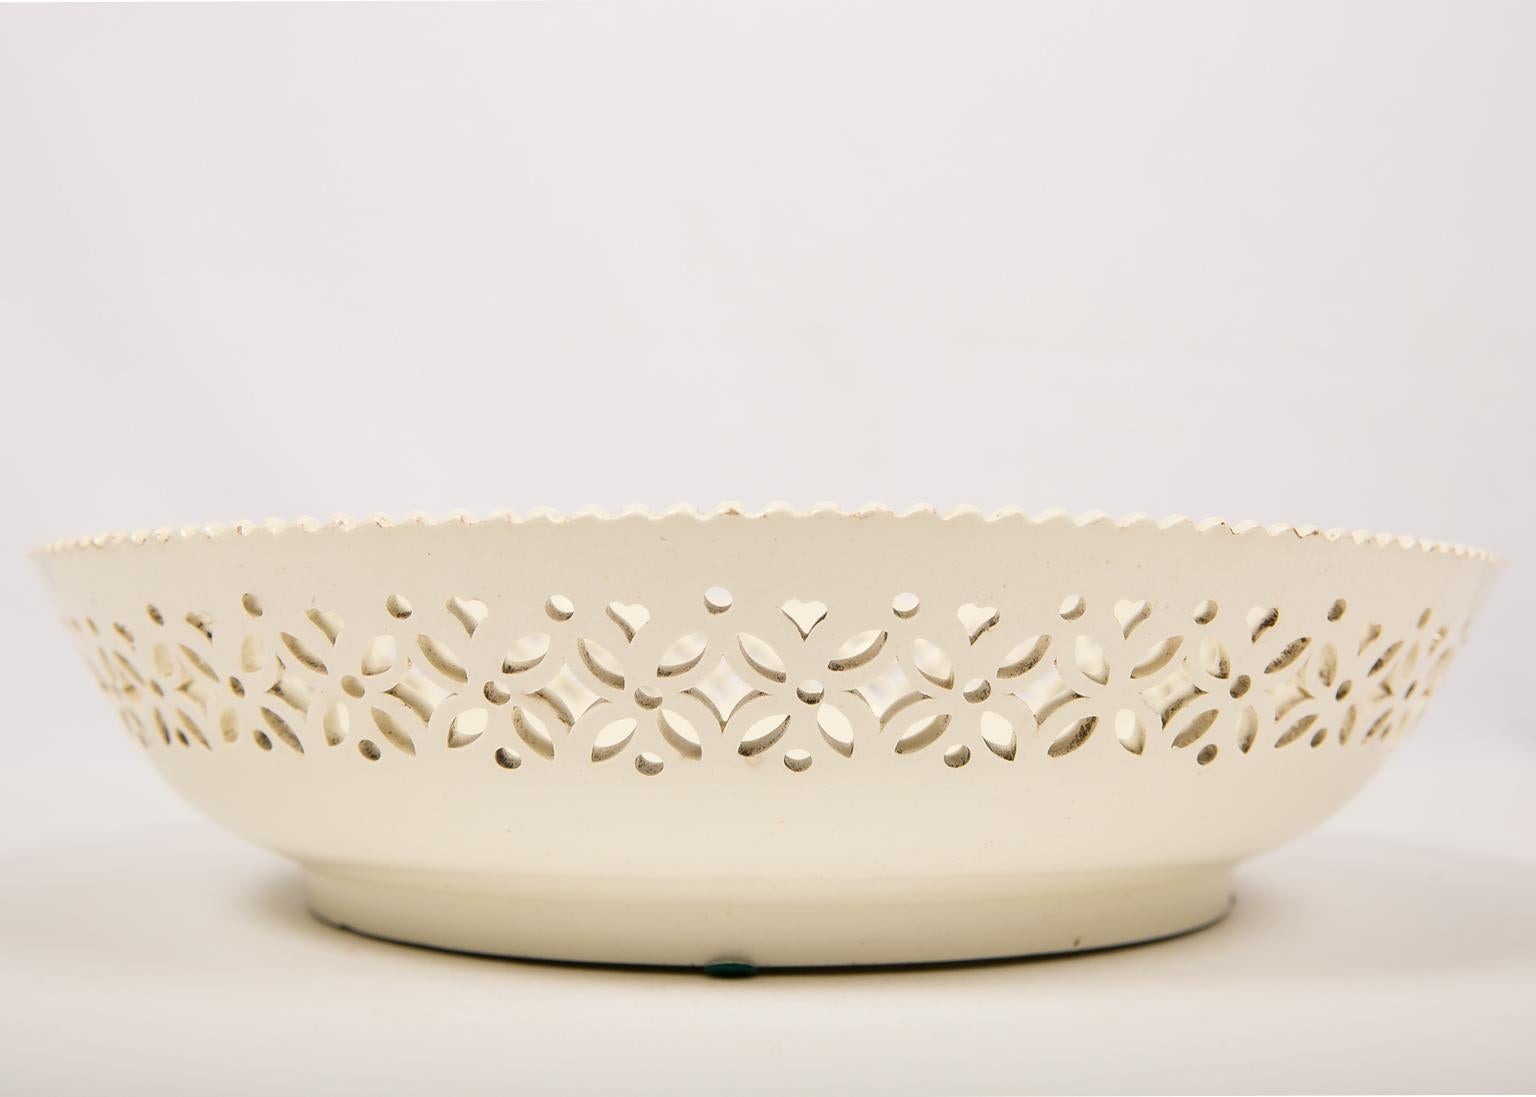 WHY WE LOVE IT: We love 18th century creamware
We are pleased to offer this large 18th century creamware bowl made in England circa 1780 with a band of crisp piercings in the shape of diamonds, heart shapes, and dots. The edge is evenly scalloped.